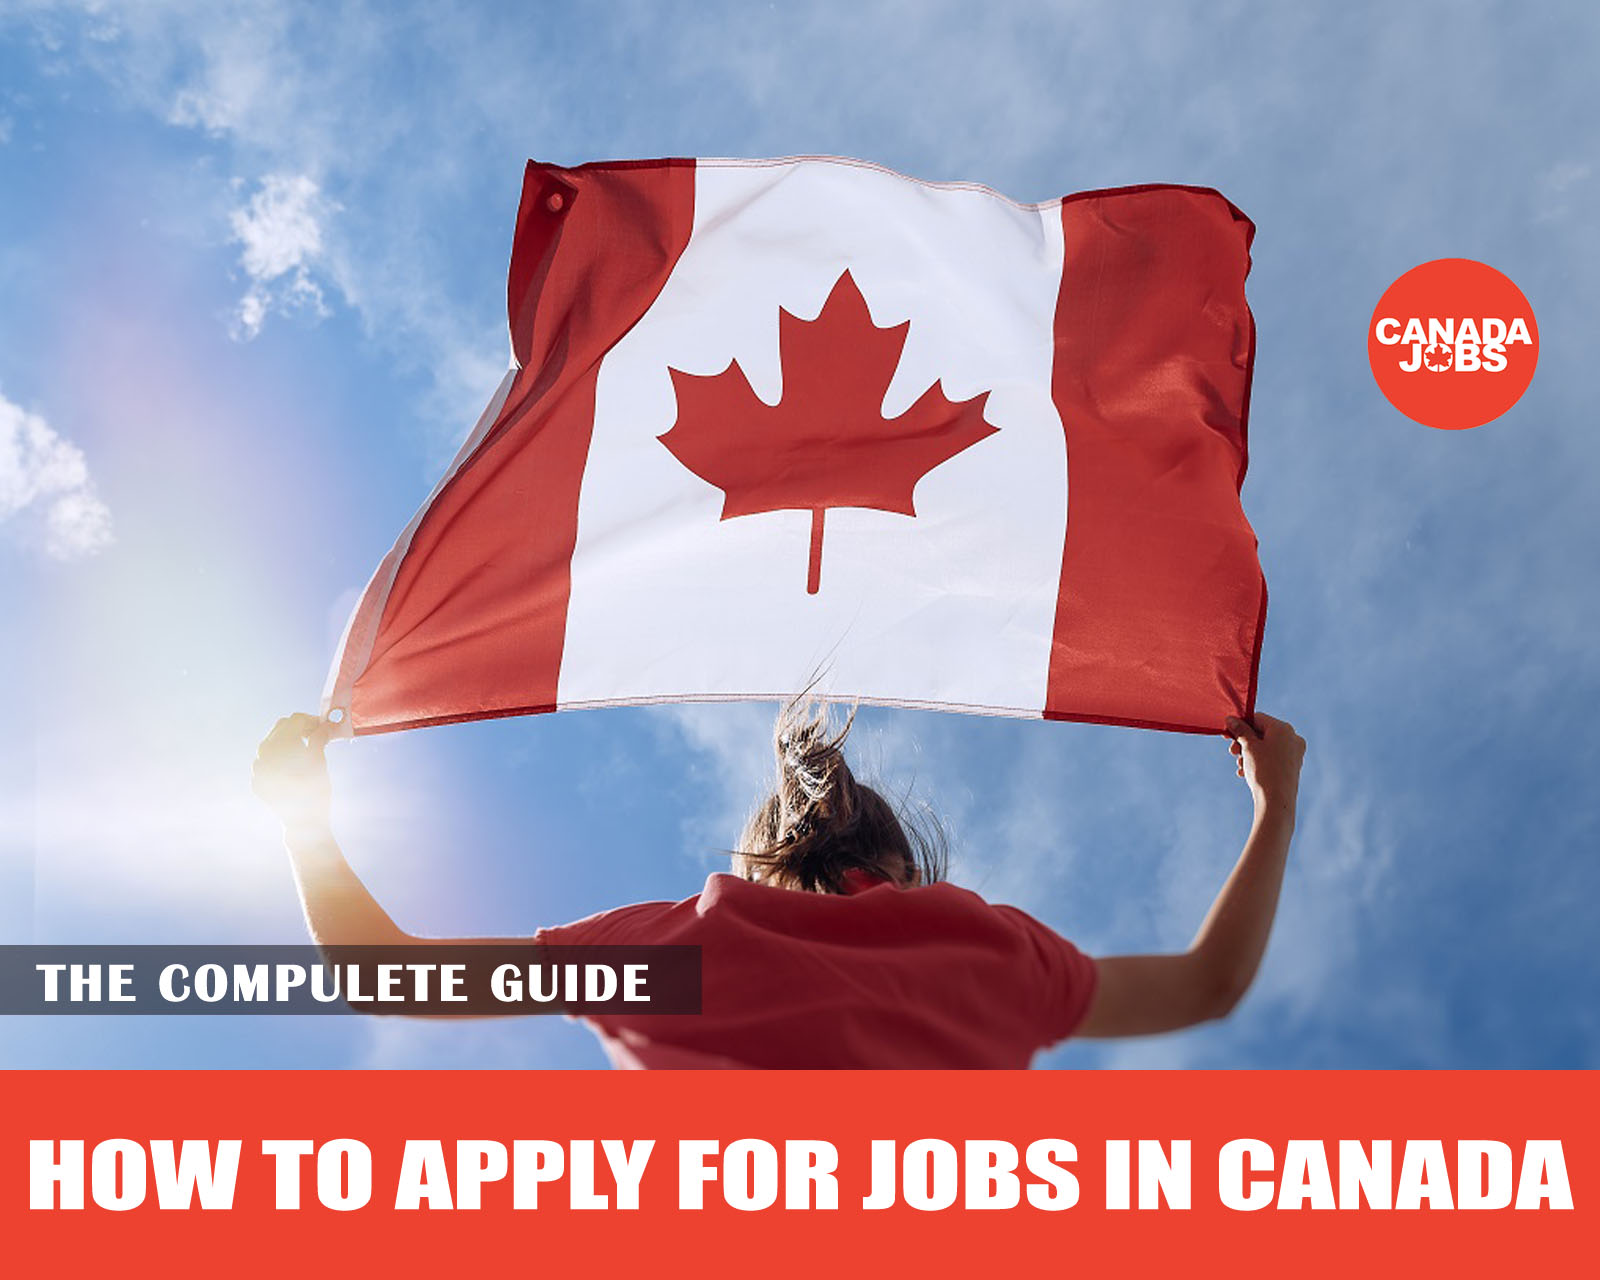 How to Apply for Jobs in Canada